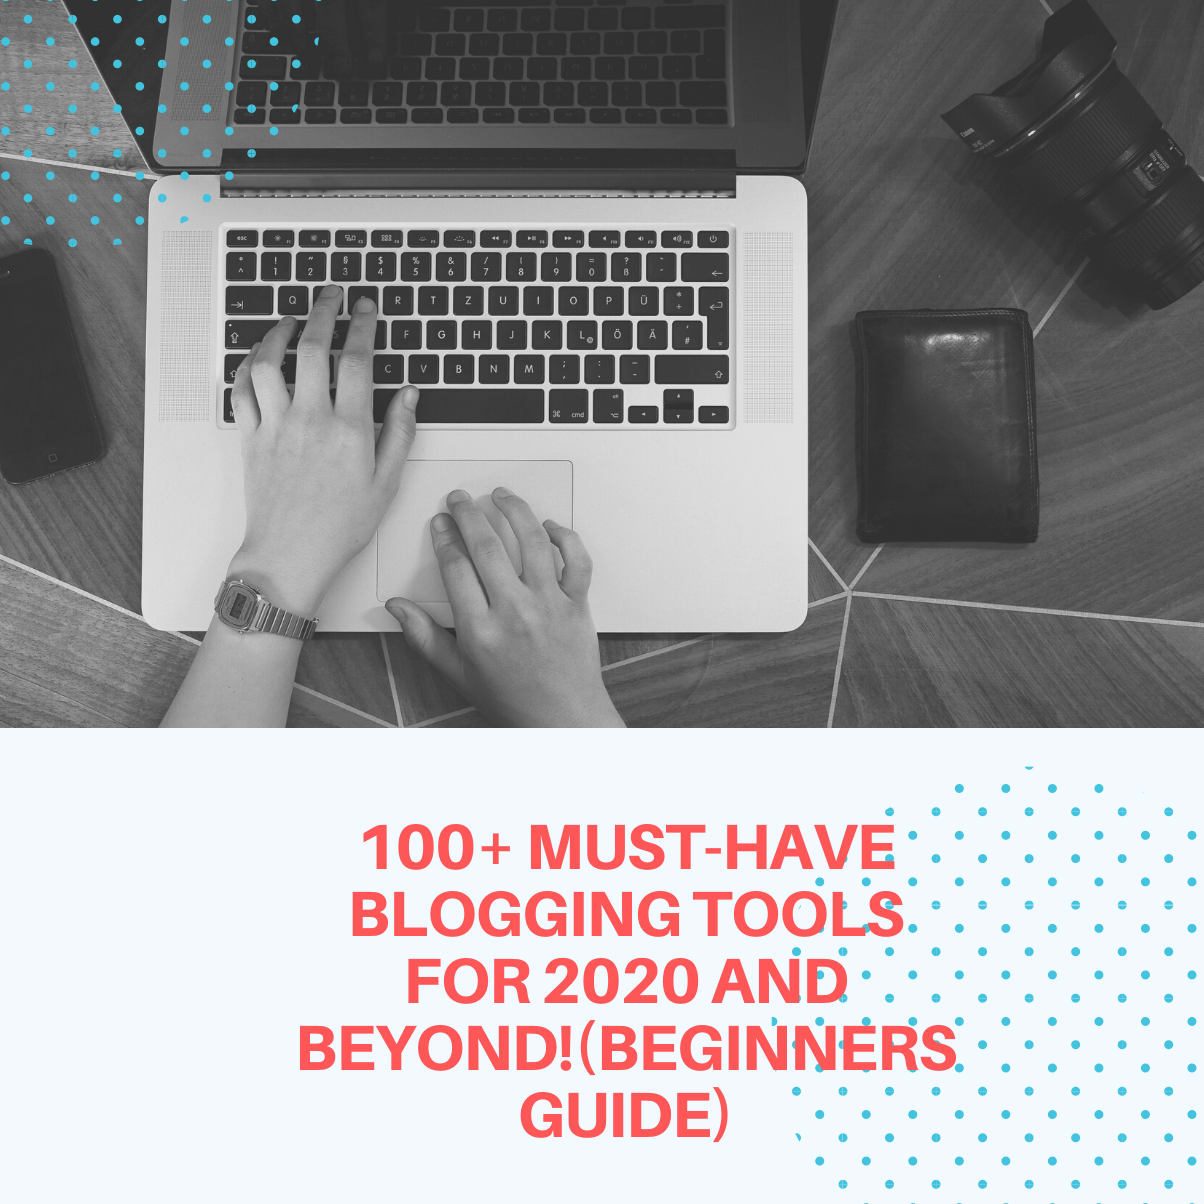 100+ MUST-HAVE BLOGGING TOOLS FOR 2020 AND BEYOND!